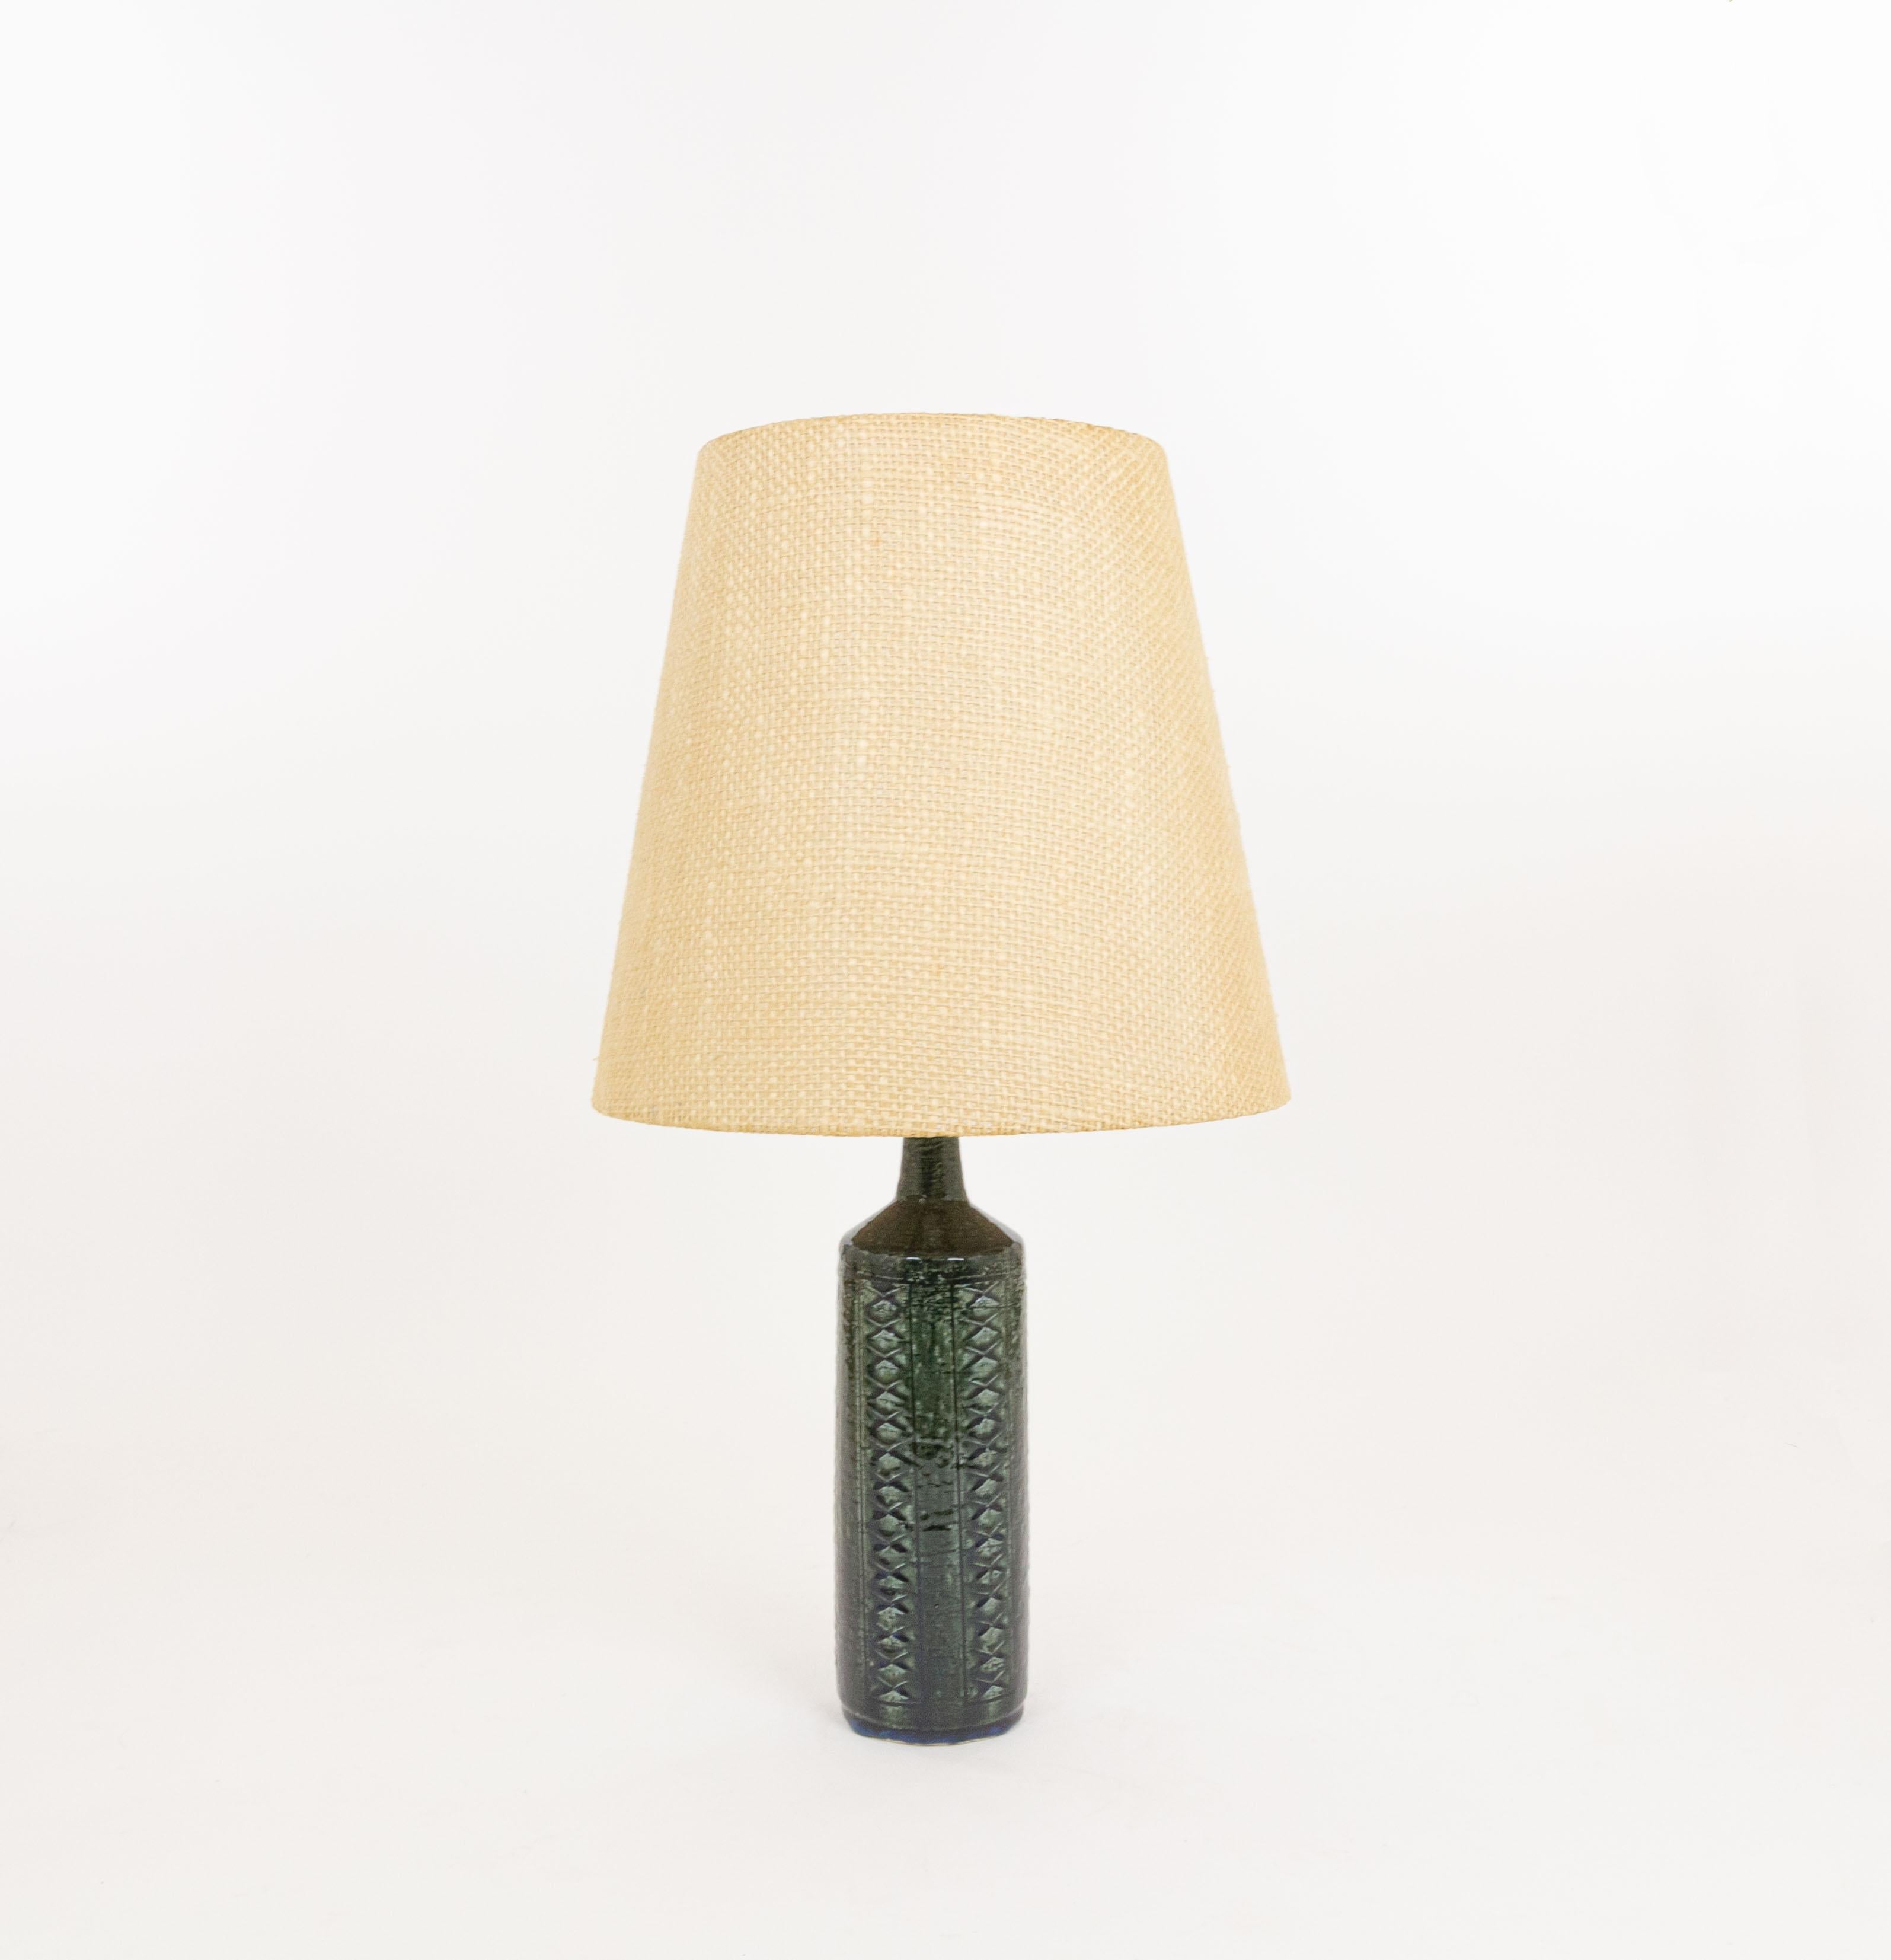 Model DL/27 table lamp made by Annelise and Per Linnemann-Schmidt for Palshus in the 1960s. The colour of the handmade decorated base is Green Blue. It has impressed patterns.

The lamp comes with its original lampshade holder. The lampshade and the